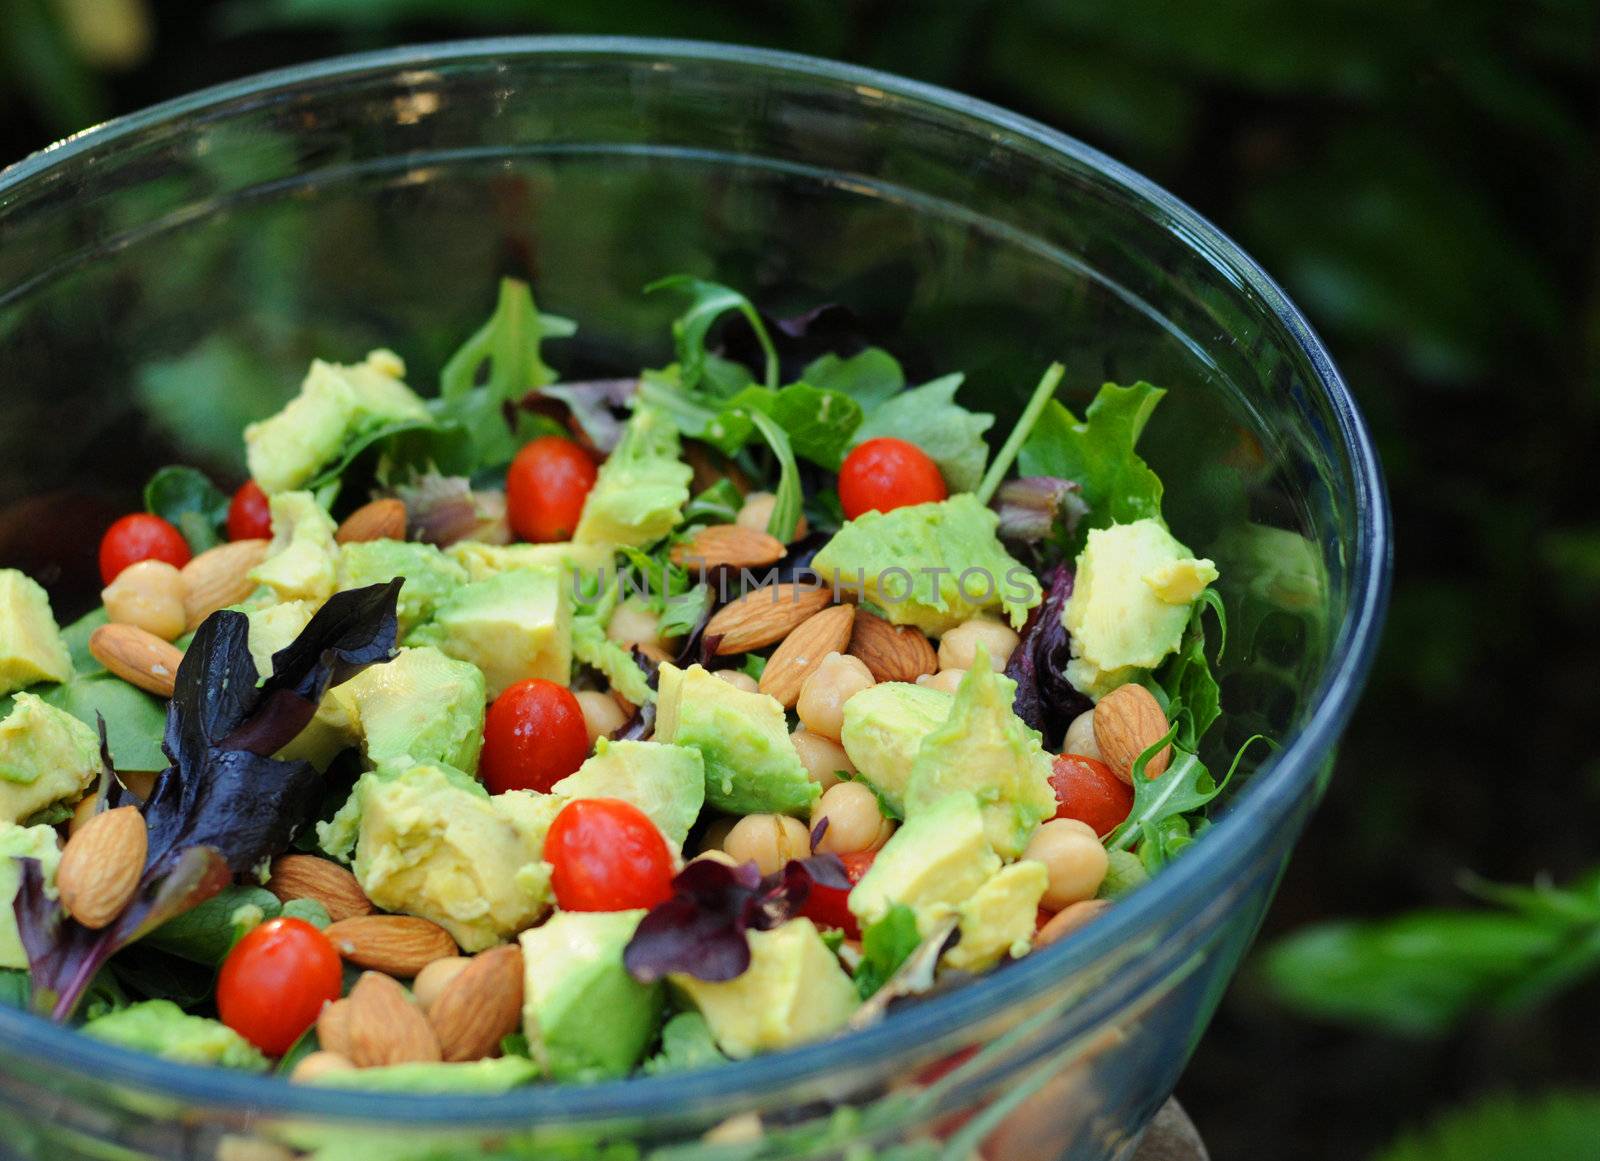 Mixed green salad with avocadoes, tomatoes, chickpeas and almonds